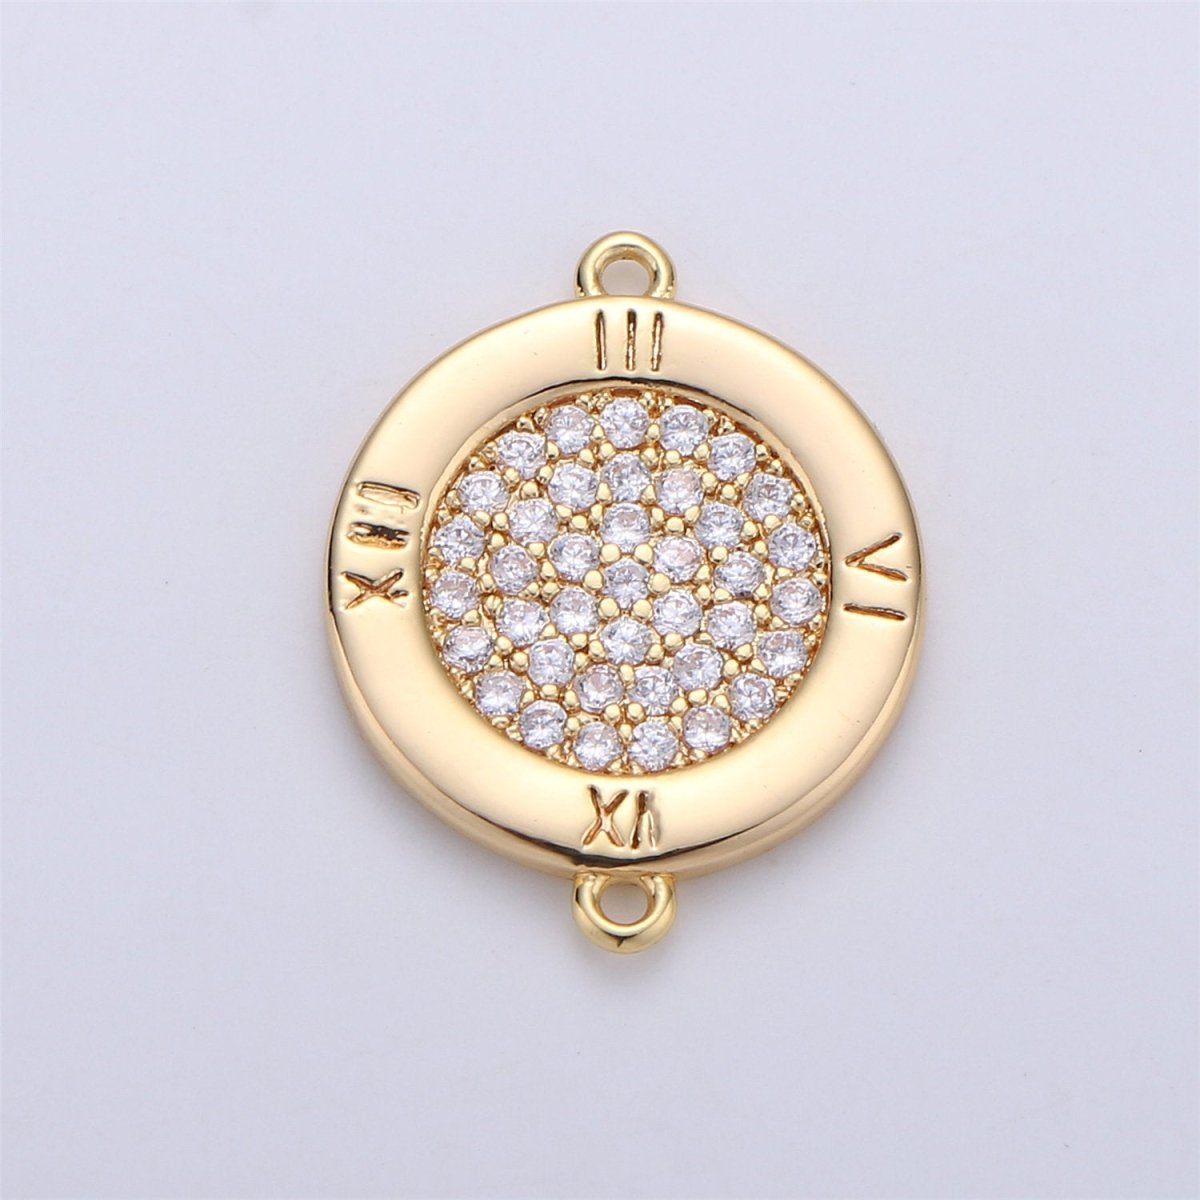 17x13mm 14k Gold Filled Clock Charms, Micro Pave Watch Charms, Bracelet Connector, Cubic Jewelry, Cz Time Charms F-323 - DLUXCA